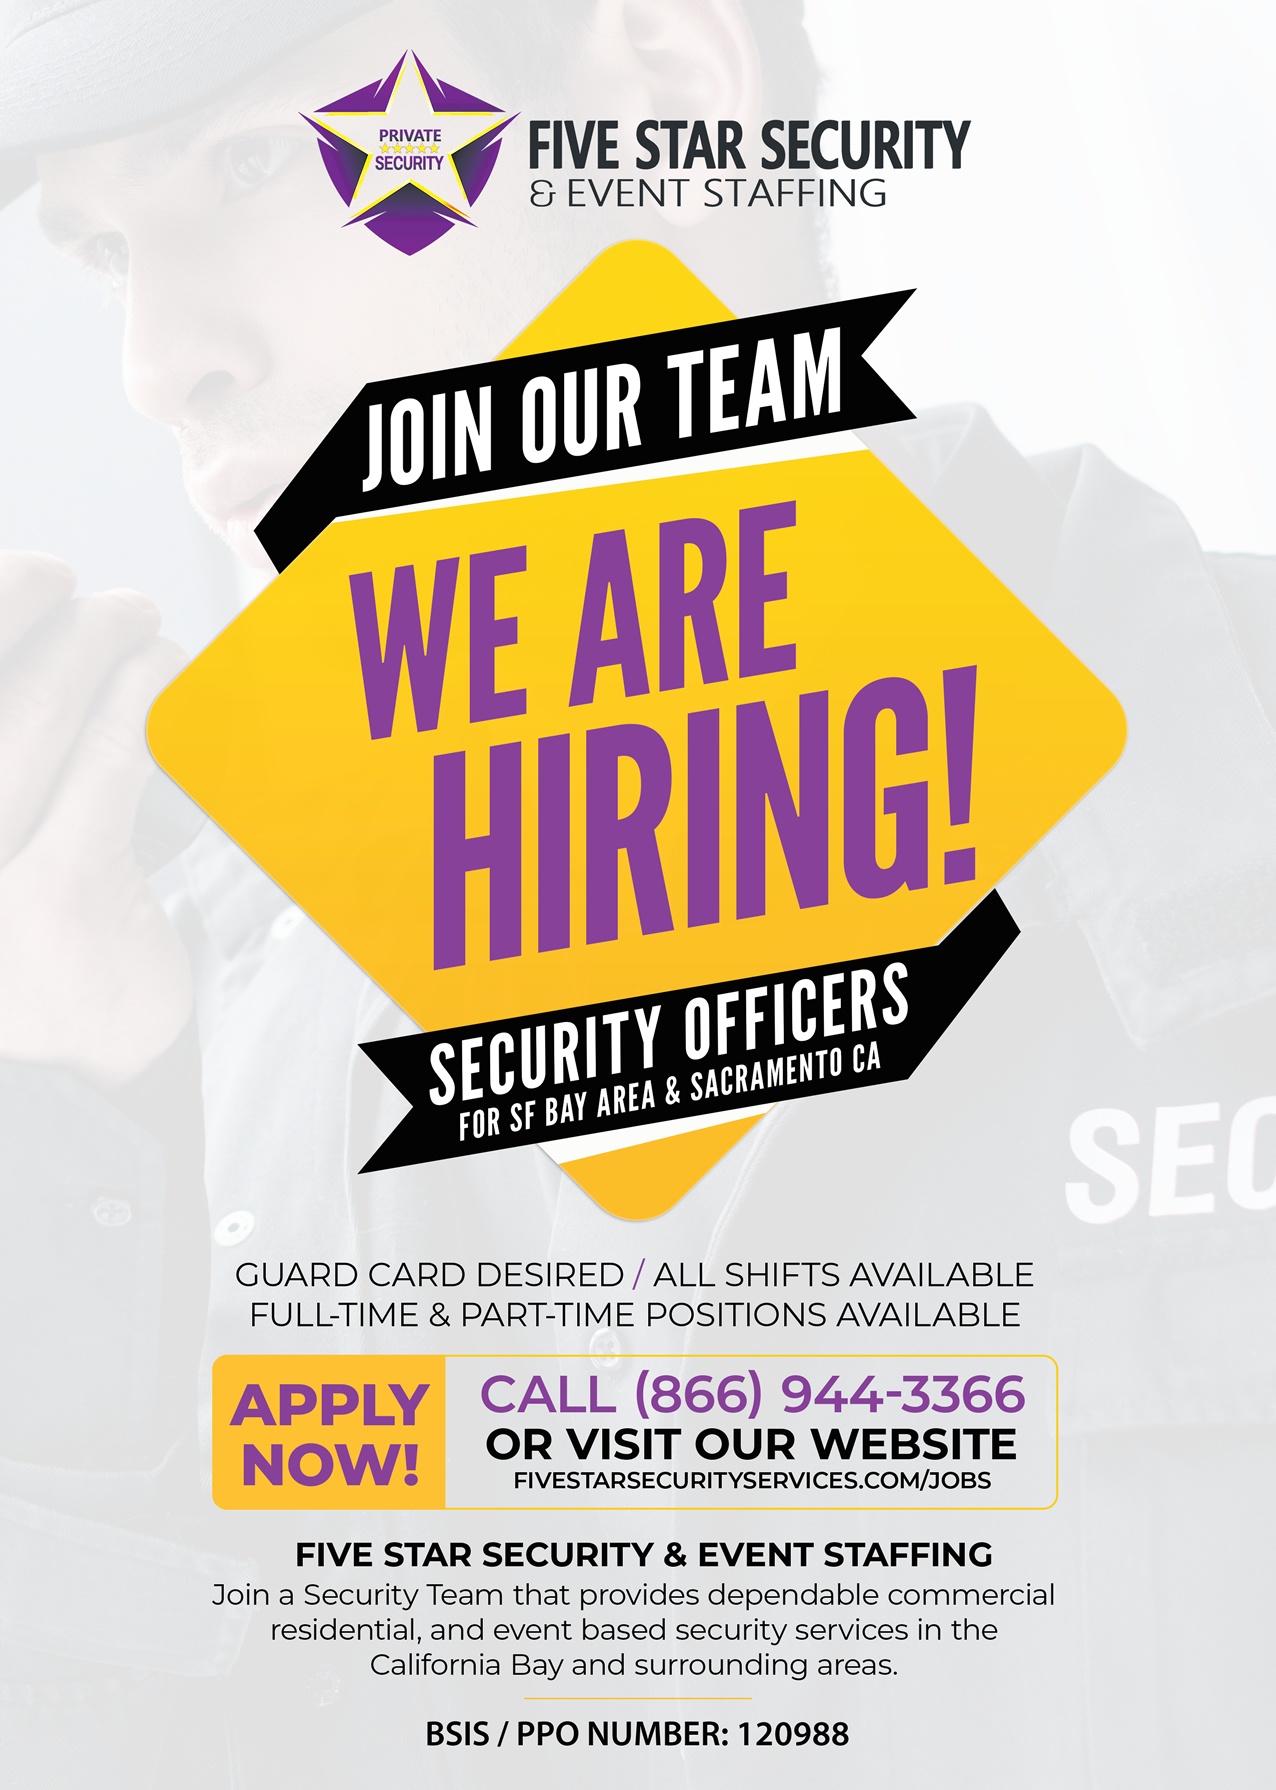 Five Star Security & Event Staffing - Oakland CA | We Are Hiring Flyer - Security Officers